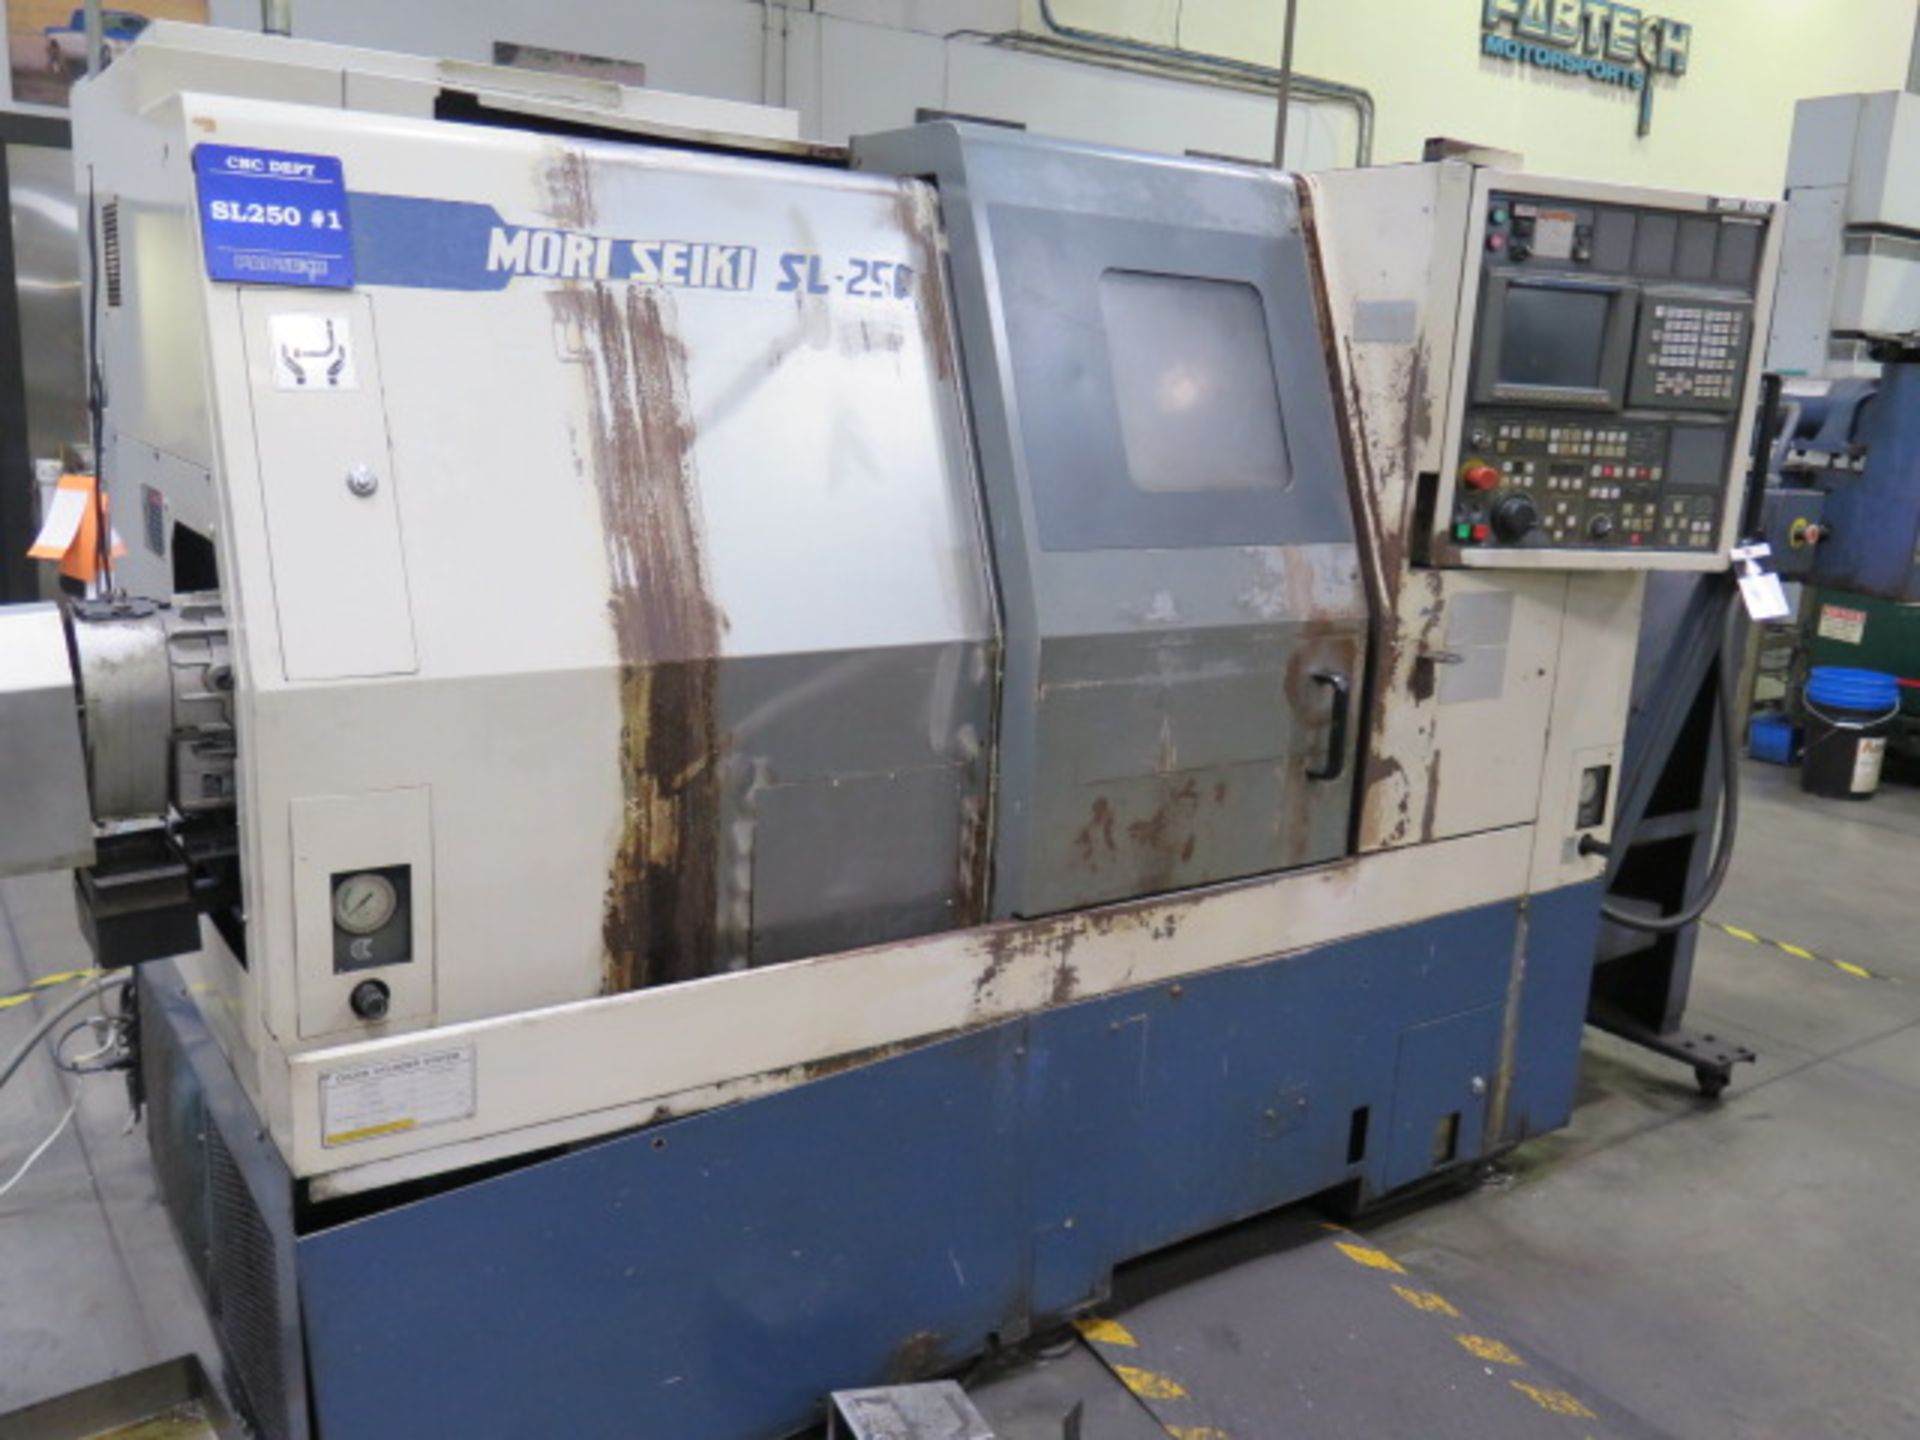 1997 Mori Seiki SL-250BMC Live Turret CNC Turning Center s/n 289 w/ MSC-518 Controls, SOLD AS IS - Image 2 of 13